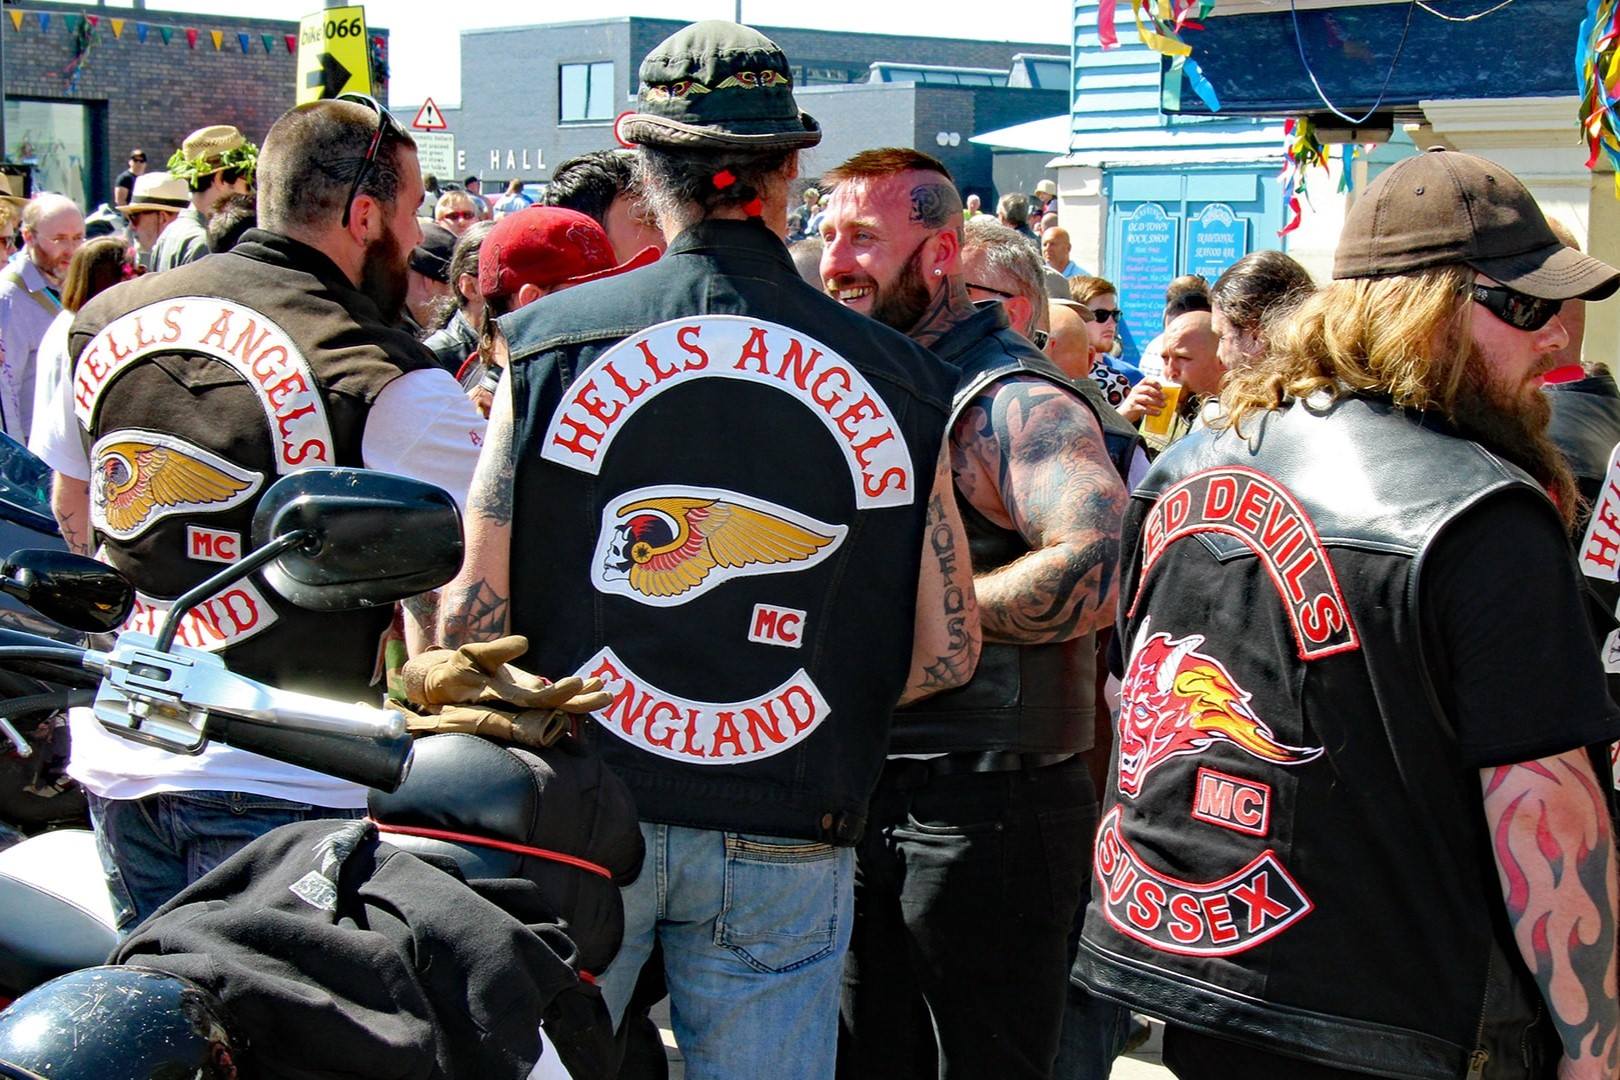 The Hidden Meaning Behind The Hells Angels Jacket Patch Revealed!